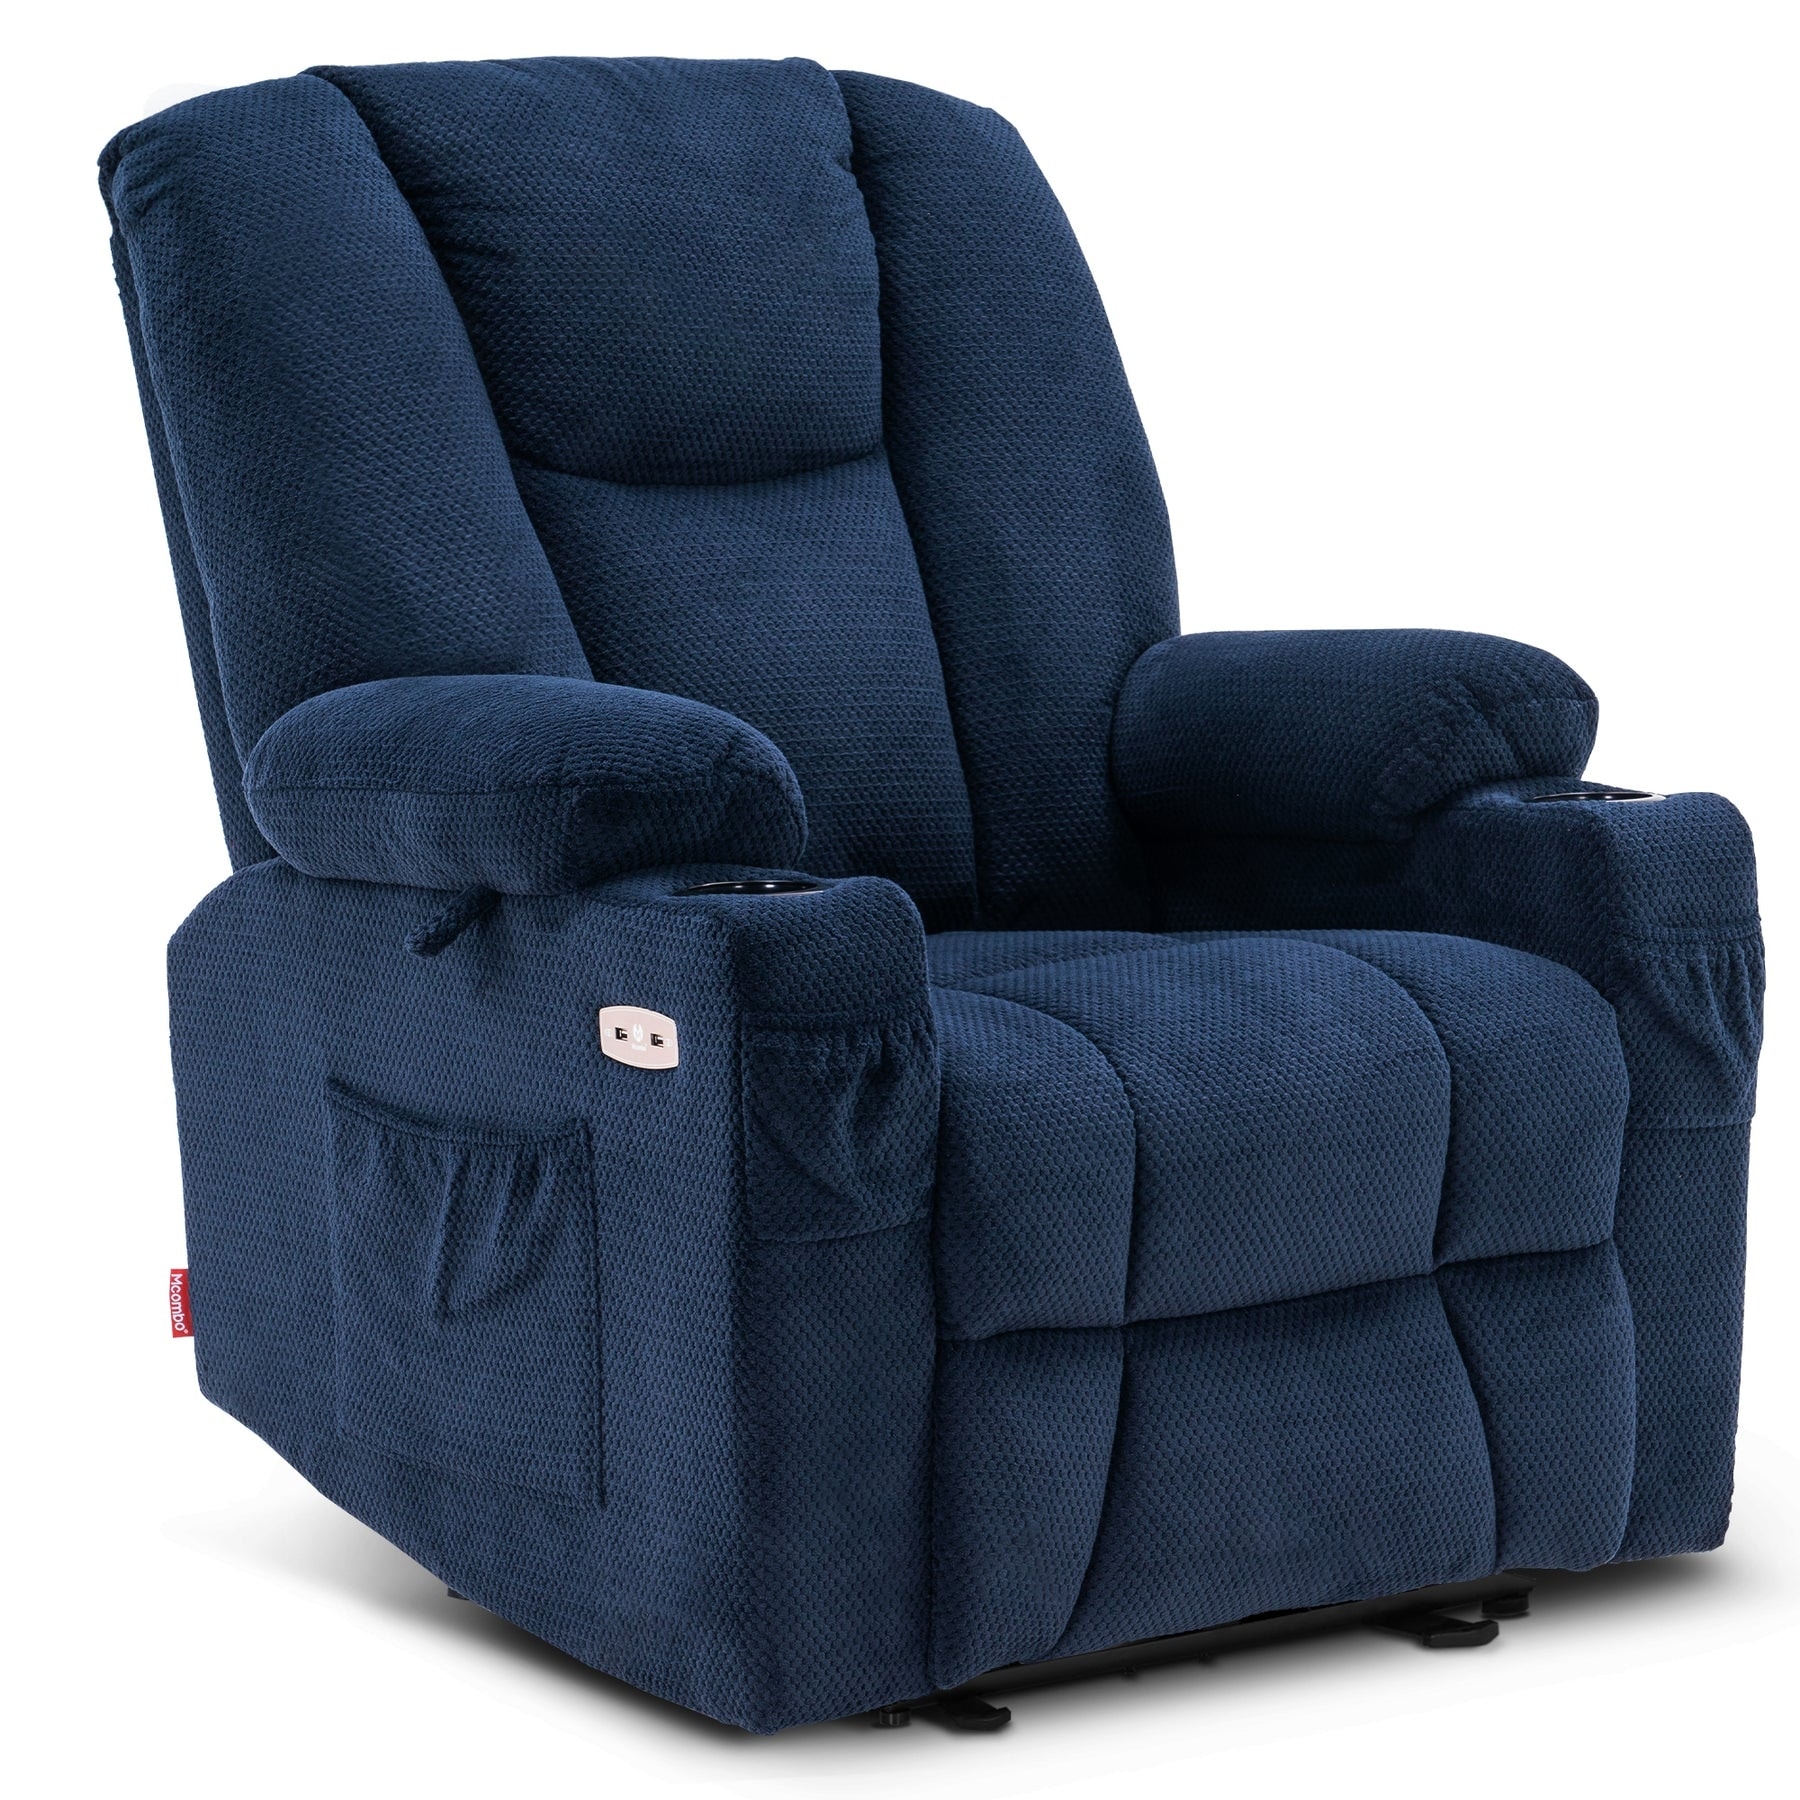 https://ak1.ostkcdn.com/images/products/is/images/direct/0af5040219400c219f1cb03e55ae0b7d68e8fac8/Mcombo-Electric-Power%C2%A0Recliner-with-Massage-%26-Heat%2C-Extended-Footrest%2C-2-USB-Ports%2C-Side-Pockets%2C-Cup-Holders%2C-Plush-Fabric-8015.jpg